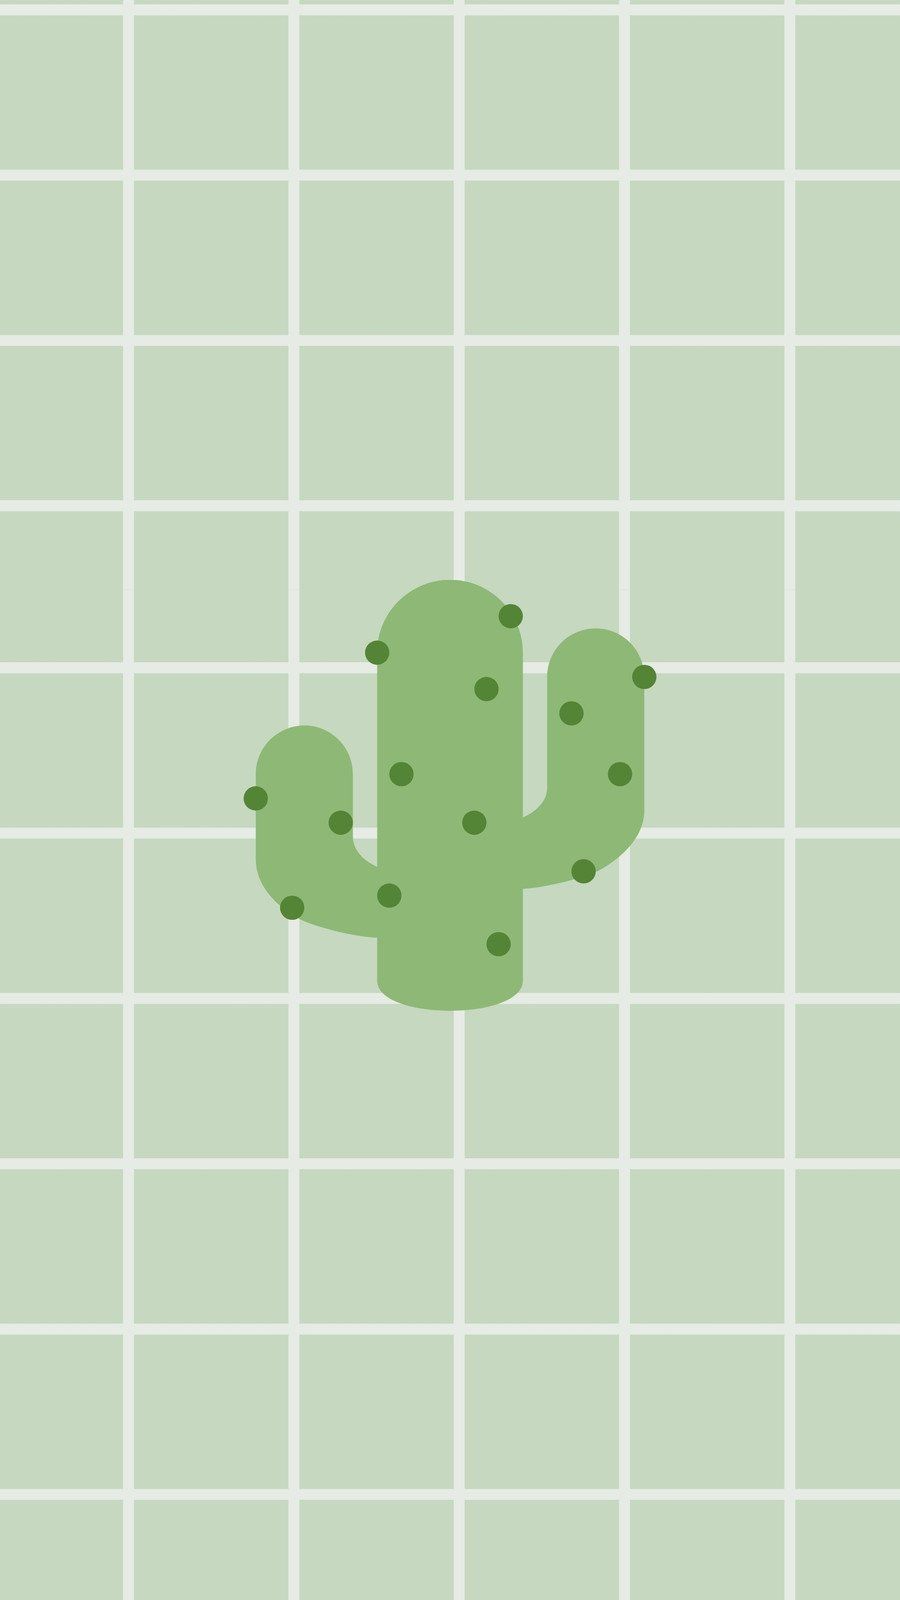 A cactus on green tile background - Cactus, grid